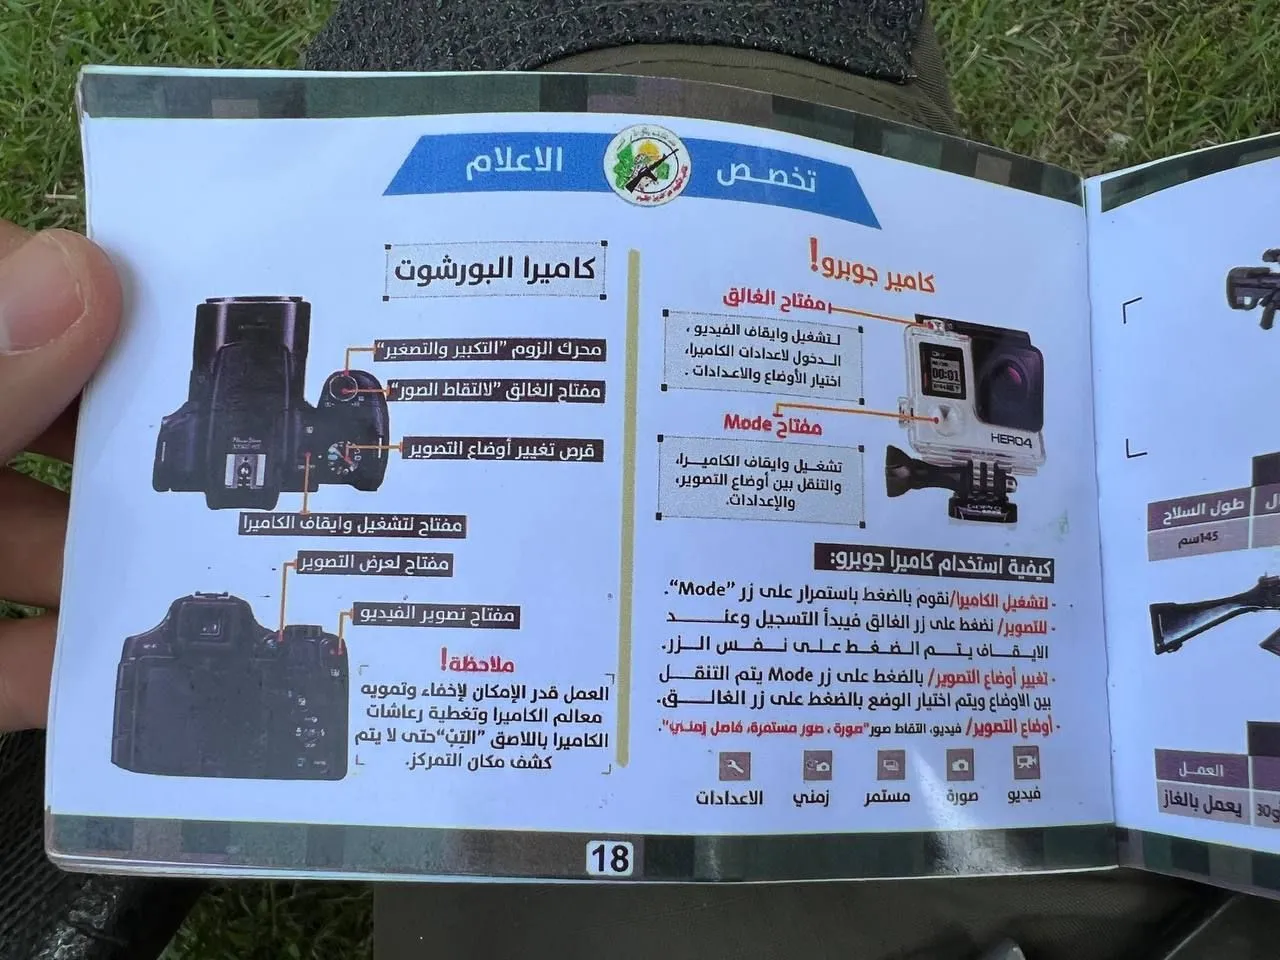 Hamas instruction booklet obtained by the IDF (CNN)Share